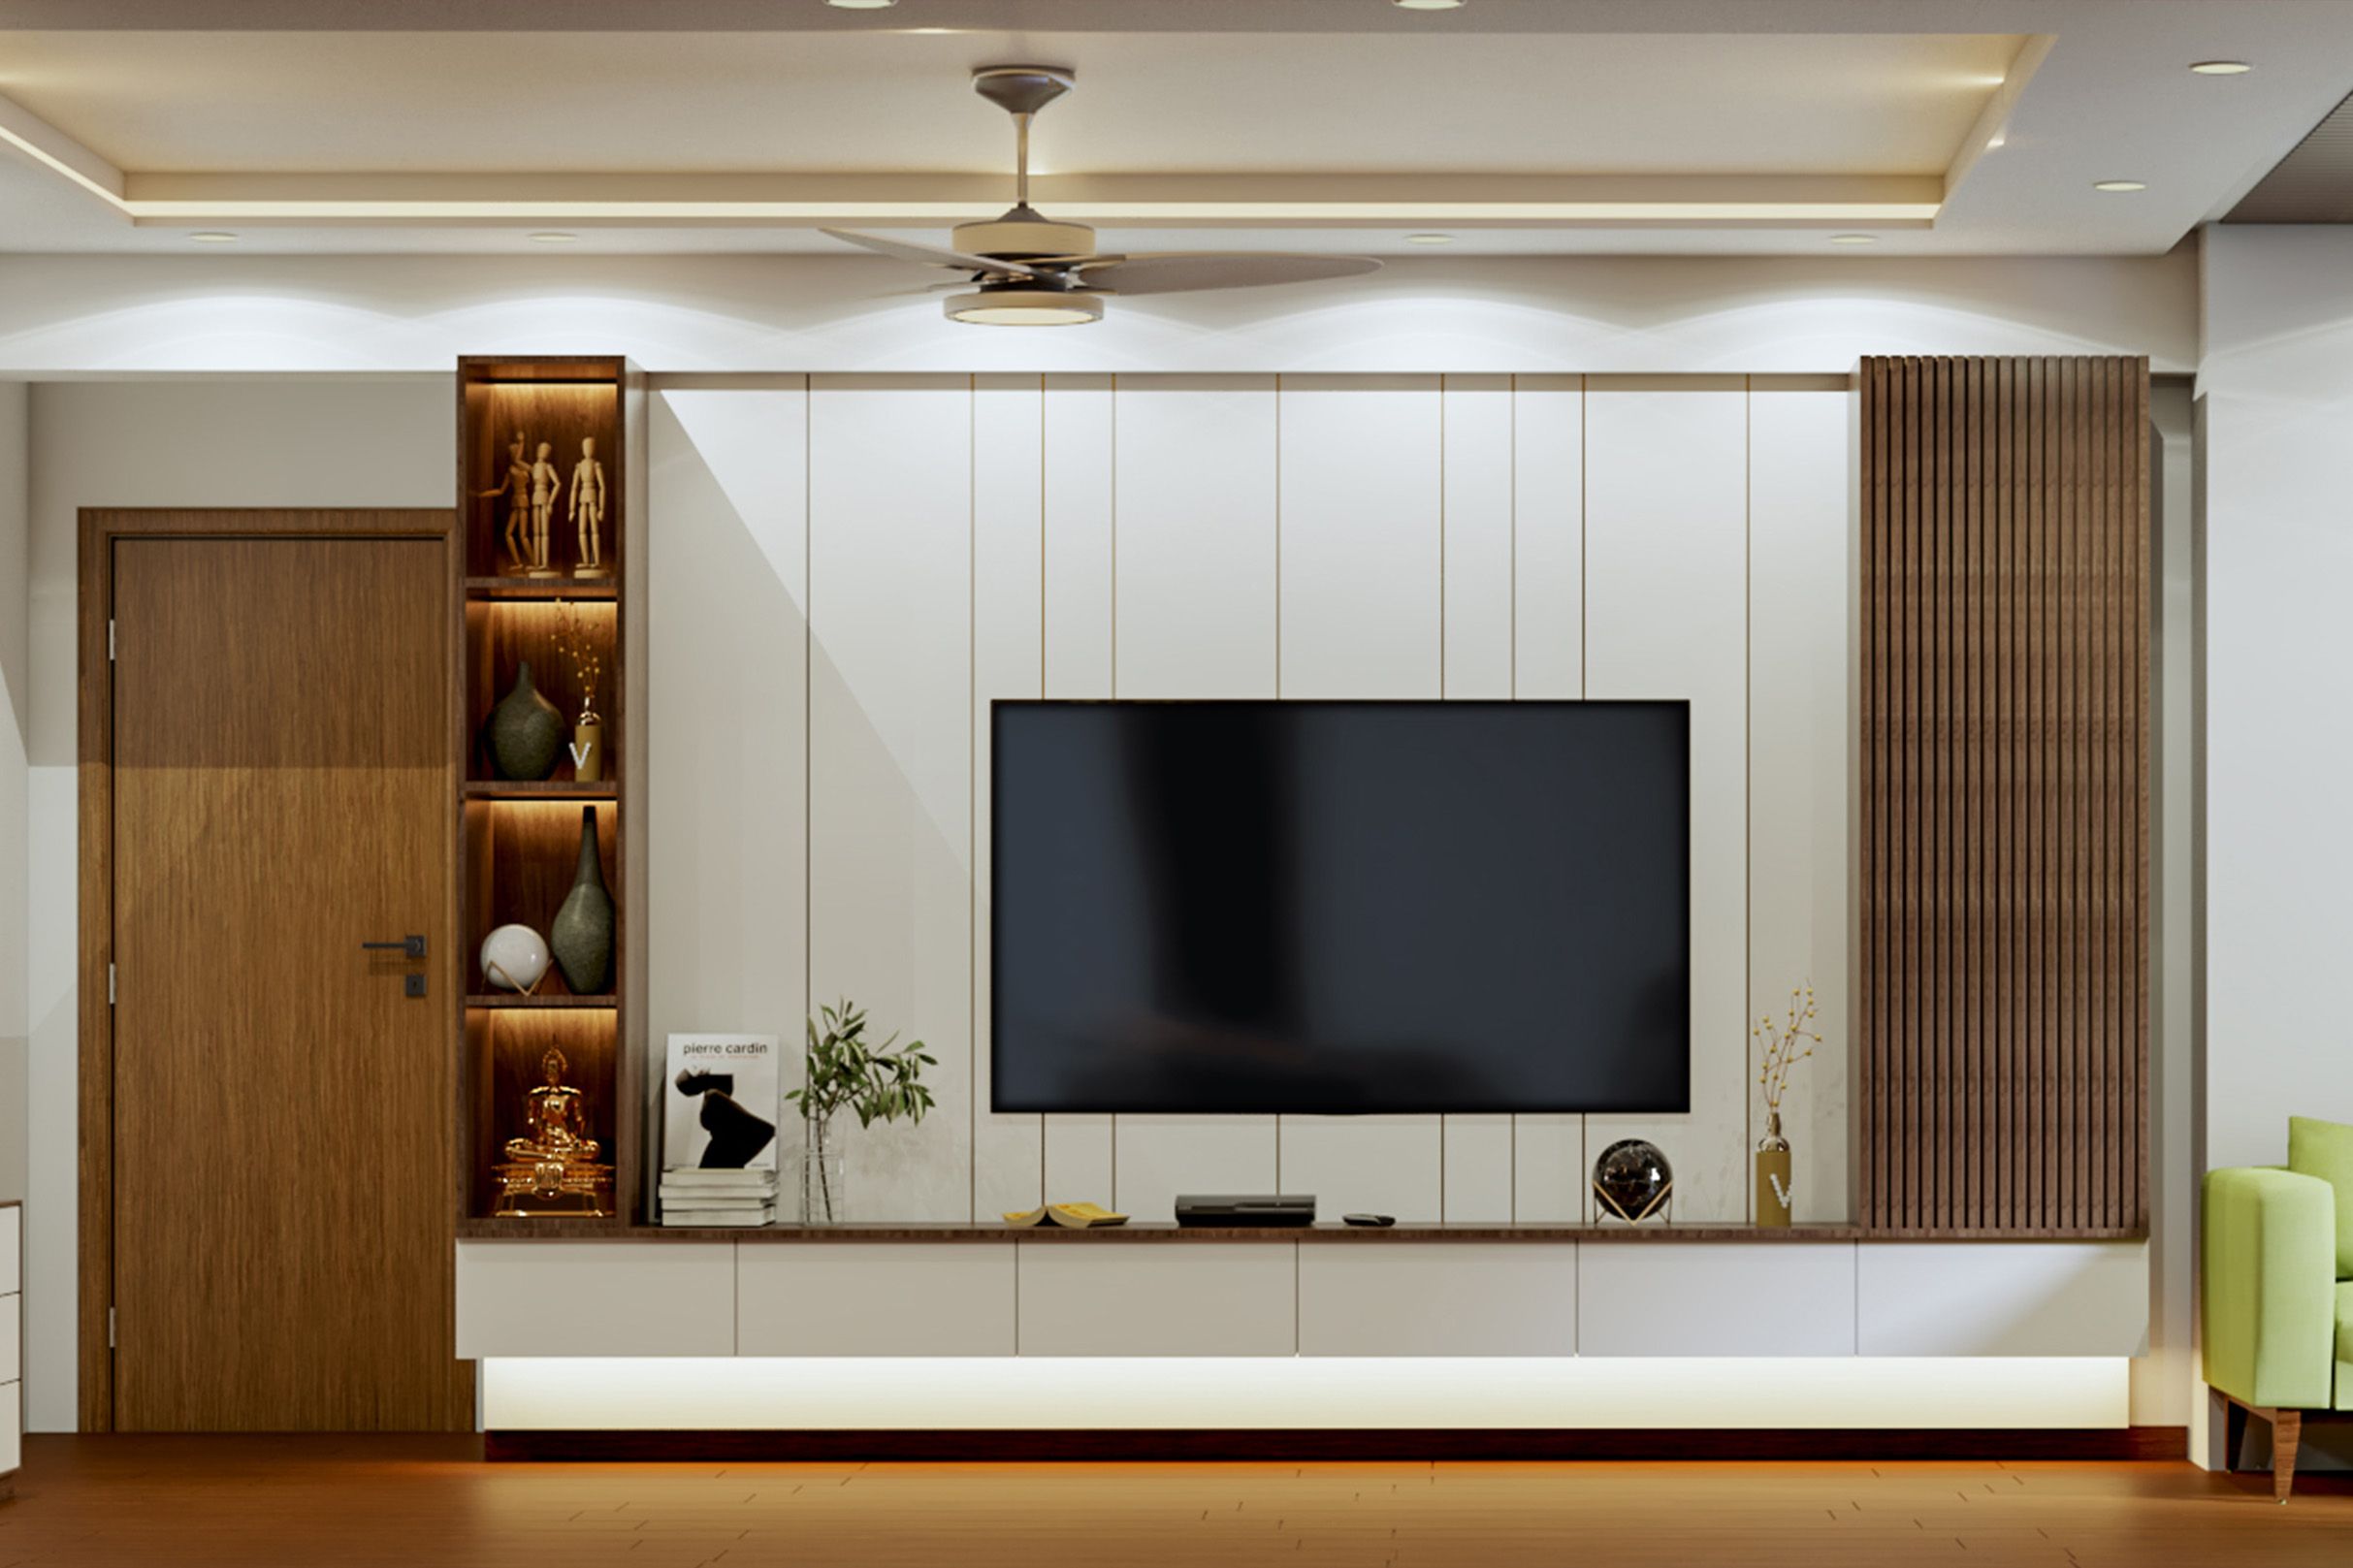 Classic White And Wood TV Unit Design With Wall-Mounted Console And Open Wooden Unit